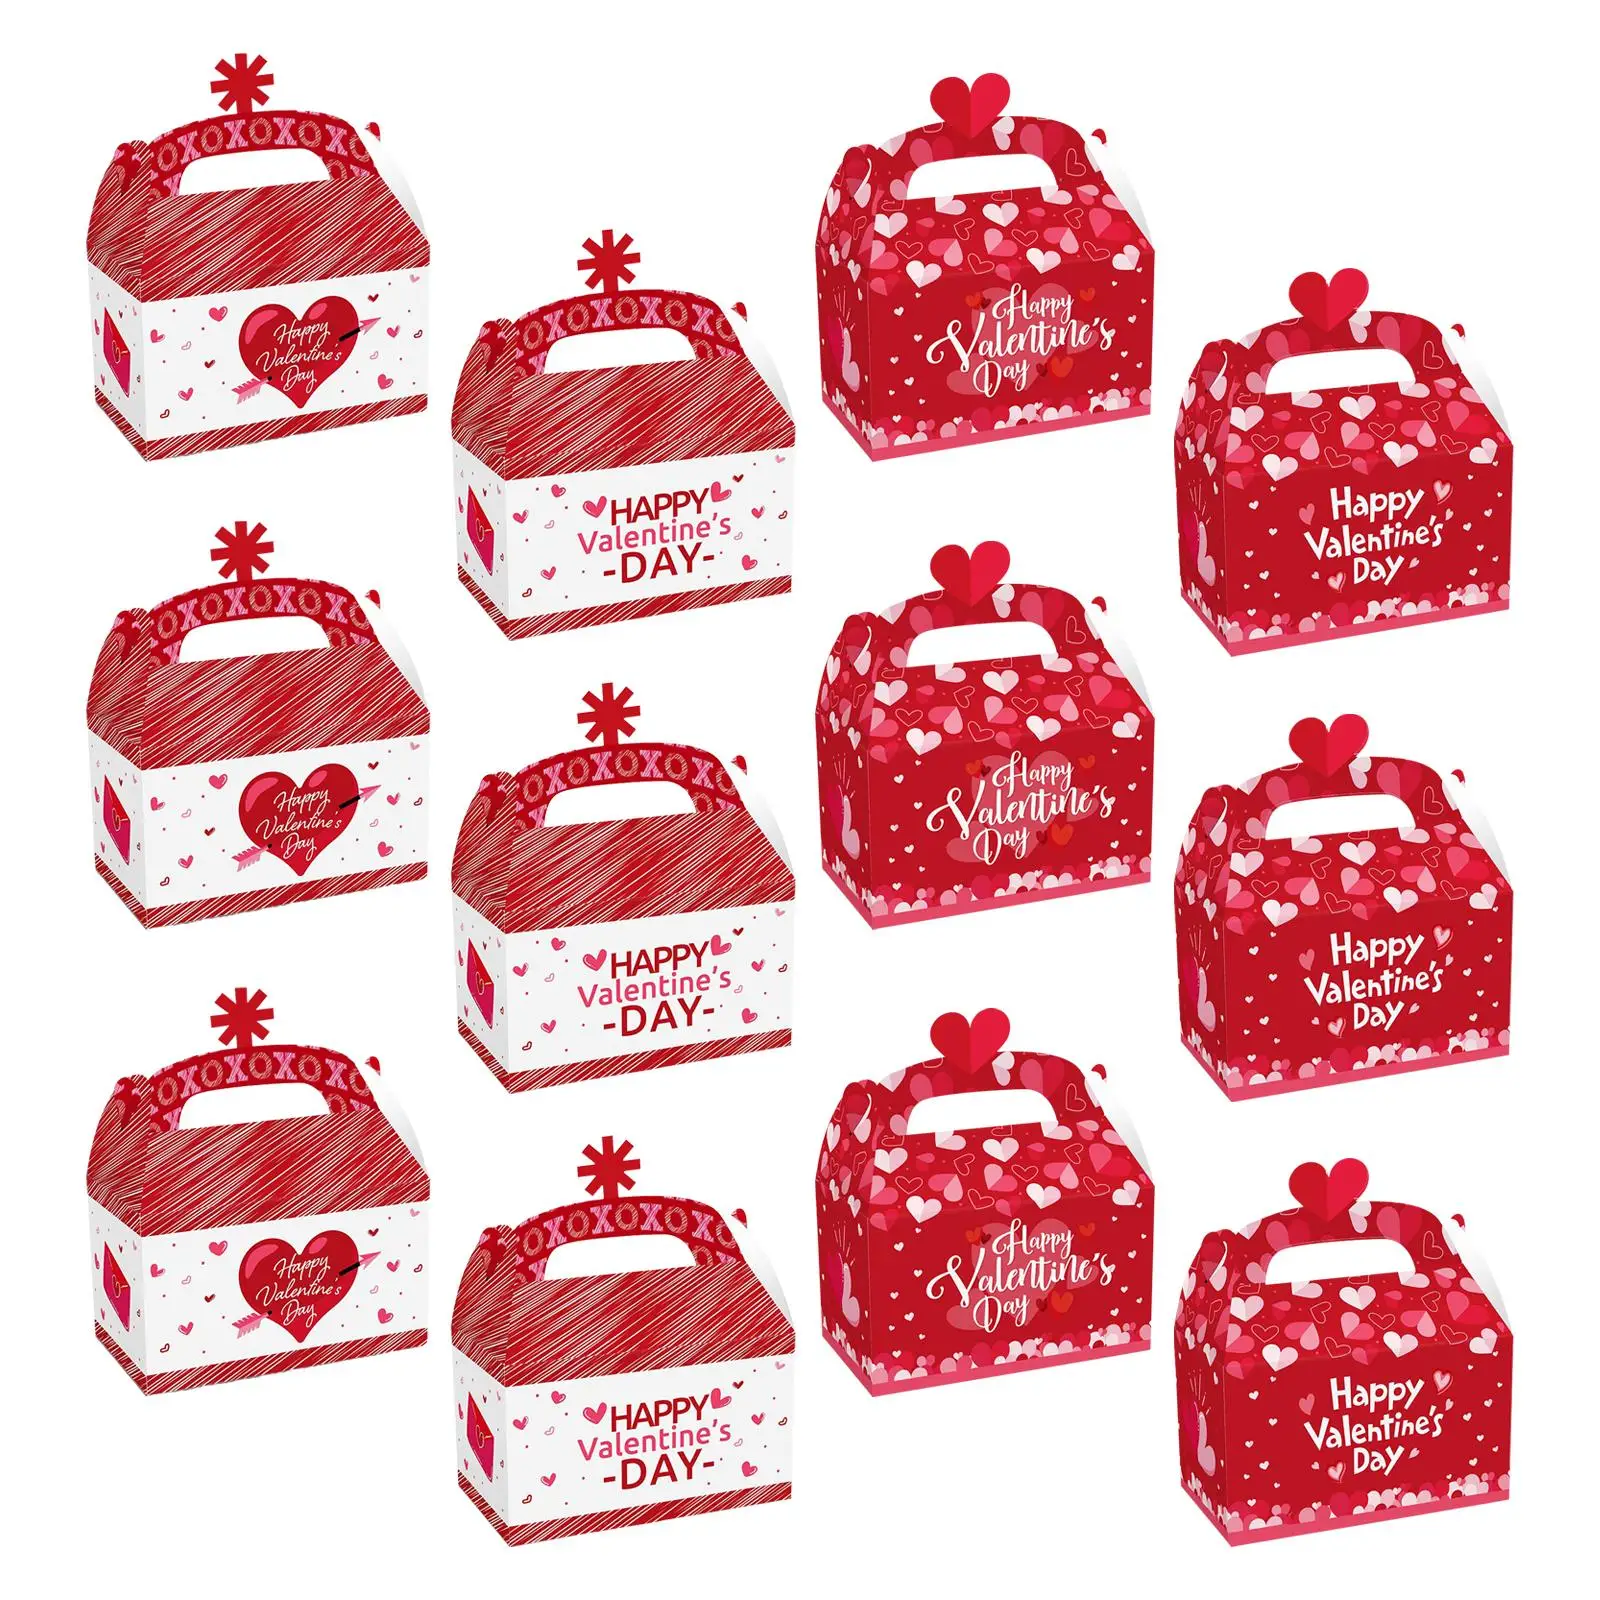 12x Valentine`s Day Treat Boxes Small Red Containers Holder Gift Boxes for Candy Sweets Snacks Dessert Valentines Party Supplies